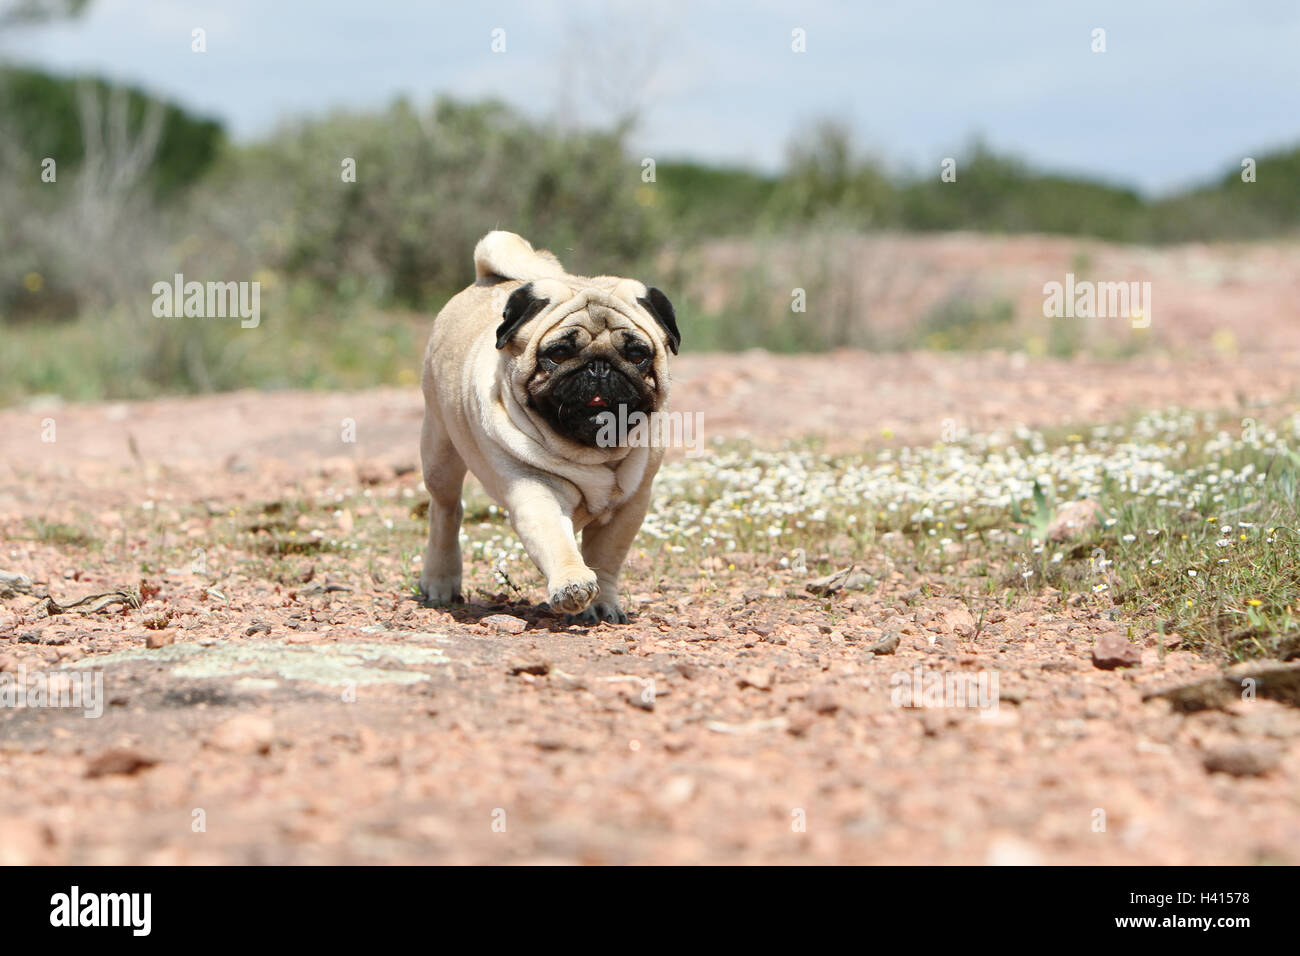 Dog Pug / Carlin / Mops adult fawn grey gray standing rock in the wild ...